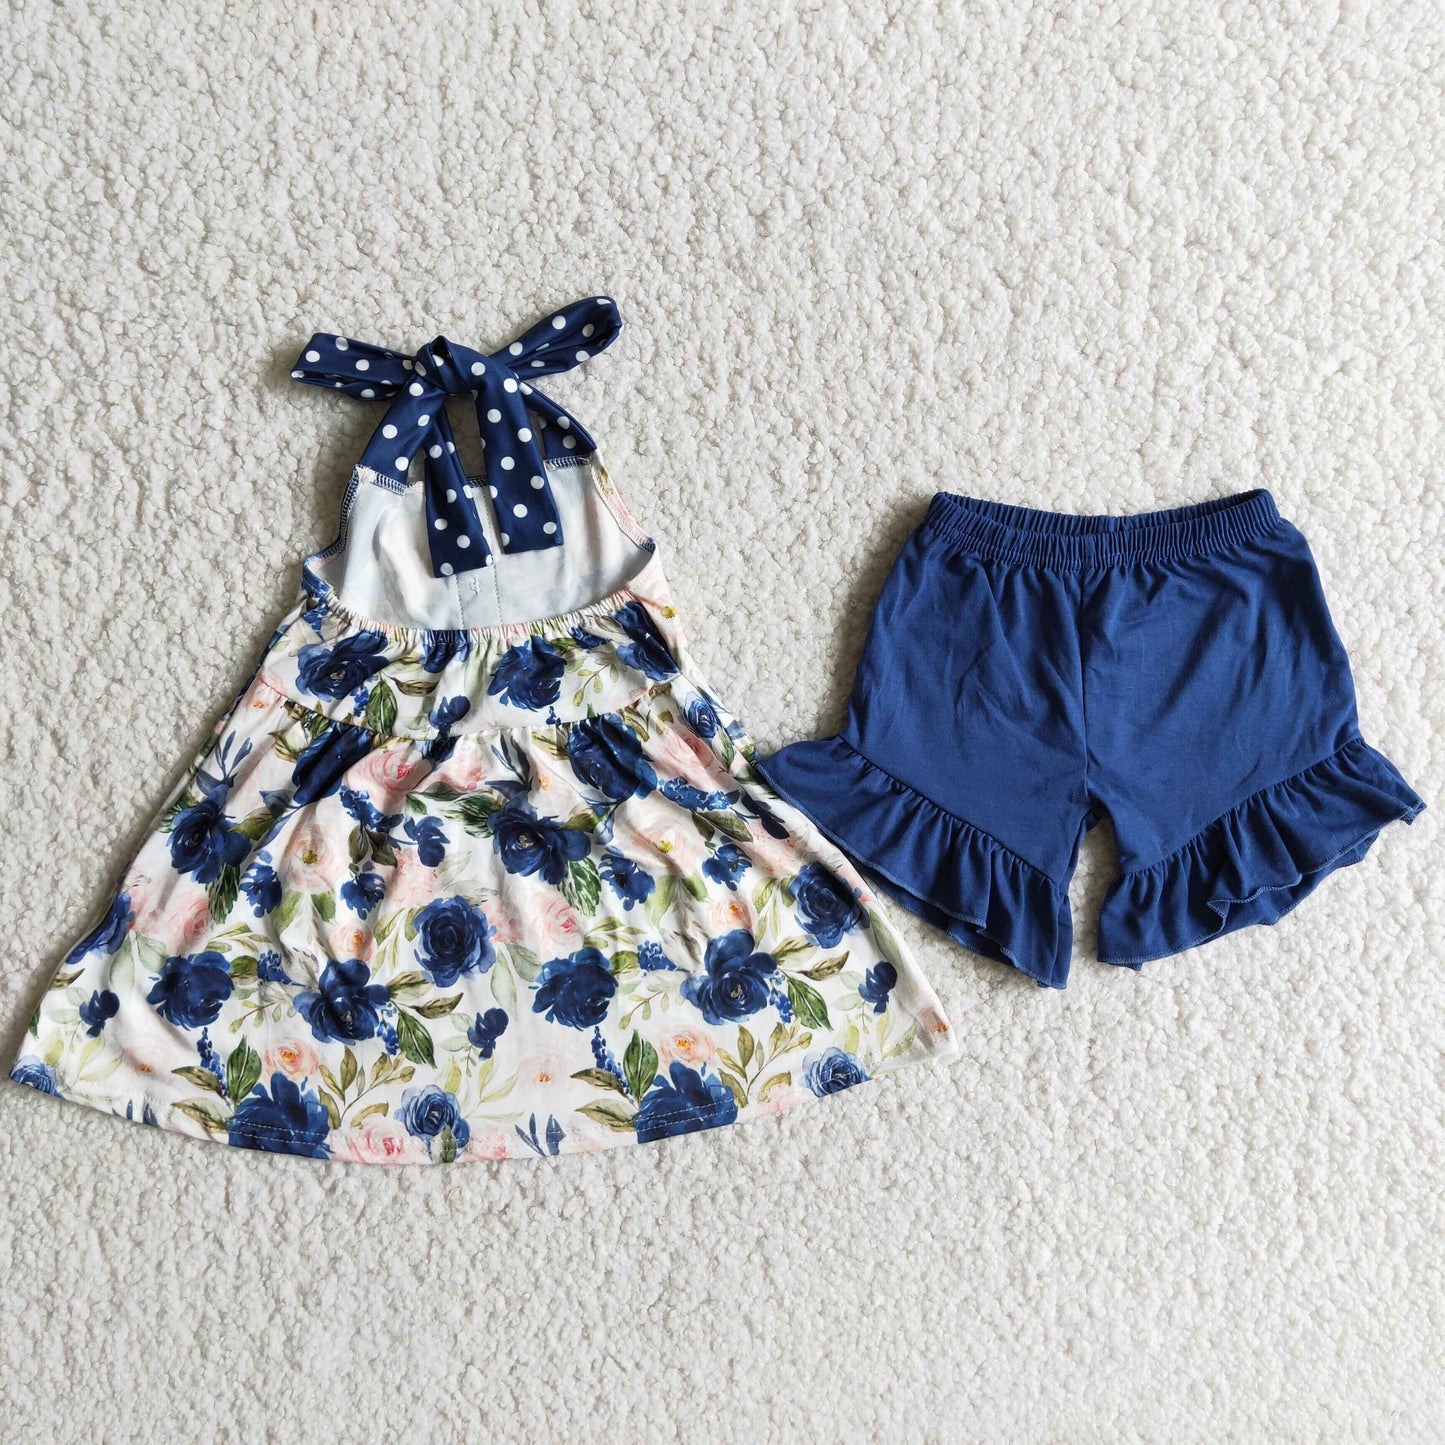 Girls blue floral print summer outfit